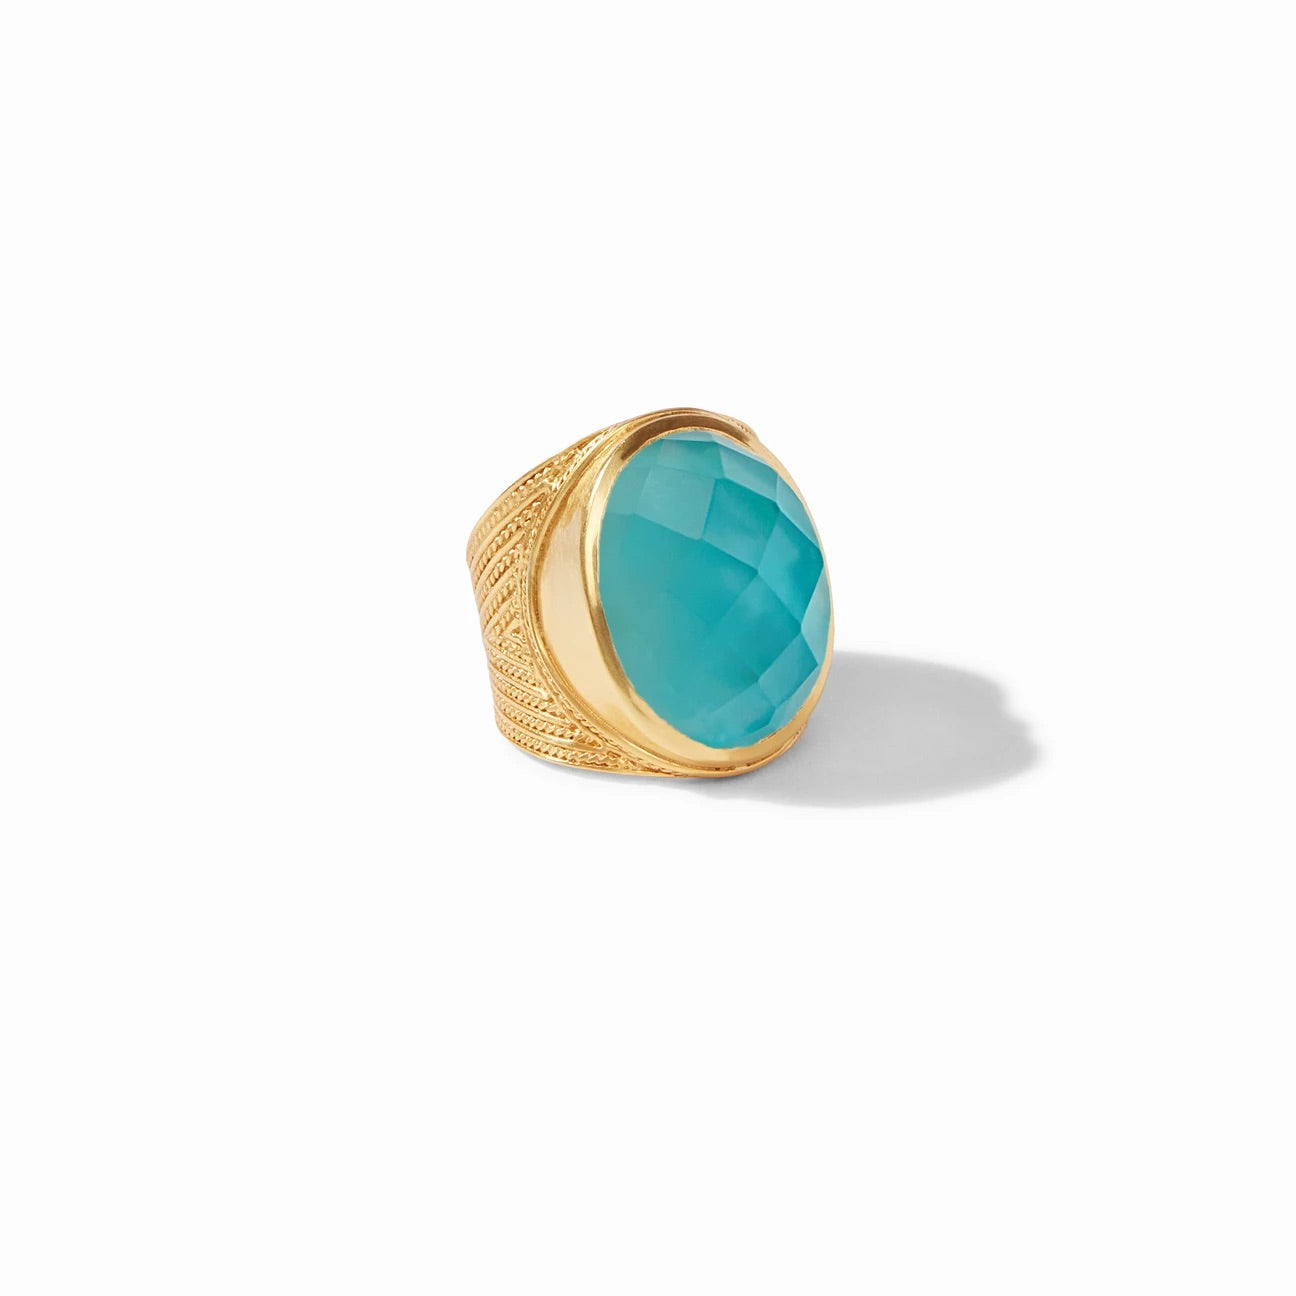 Verona Statement Ring Gold Iridescent Bahamian  Blue - Size 8 (Adjustable) Rings Julie Vos   